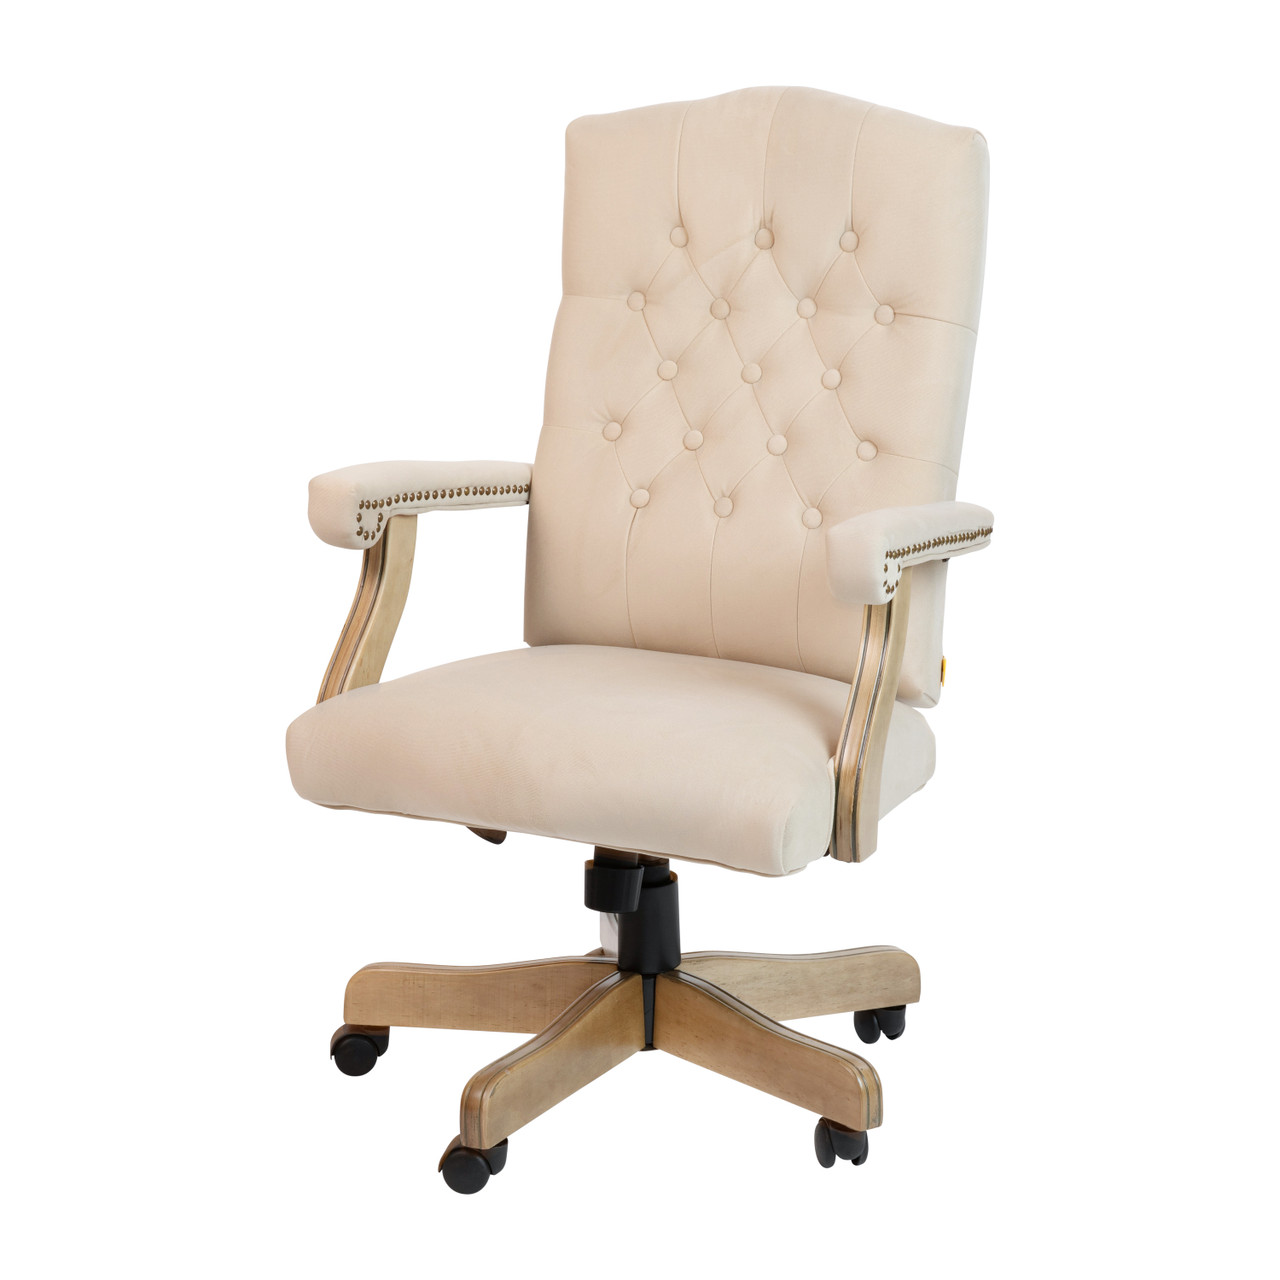 Flash Furniture Ivory Microfiber Classic Executive Swivel Office Chair with Driftwood Arms and Base, Model# 802-IV-GG